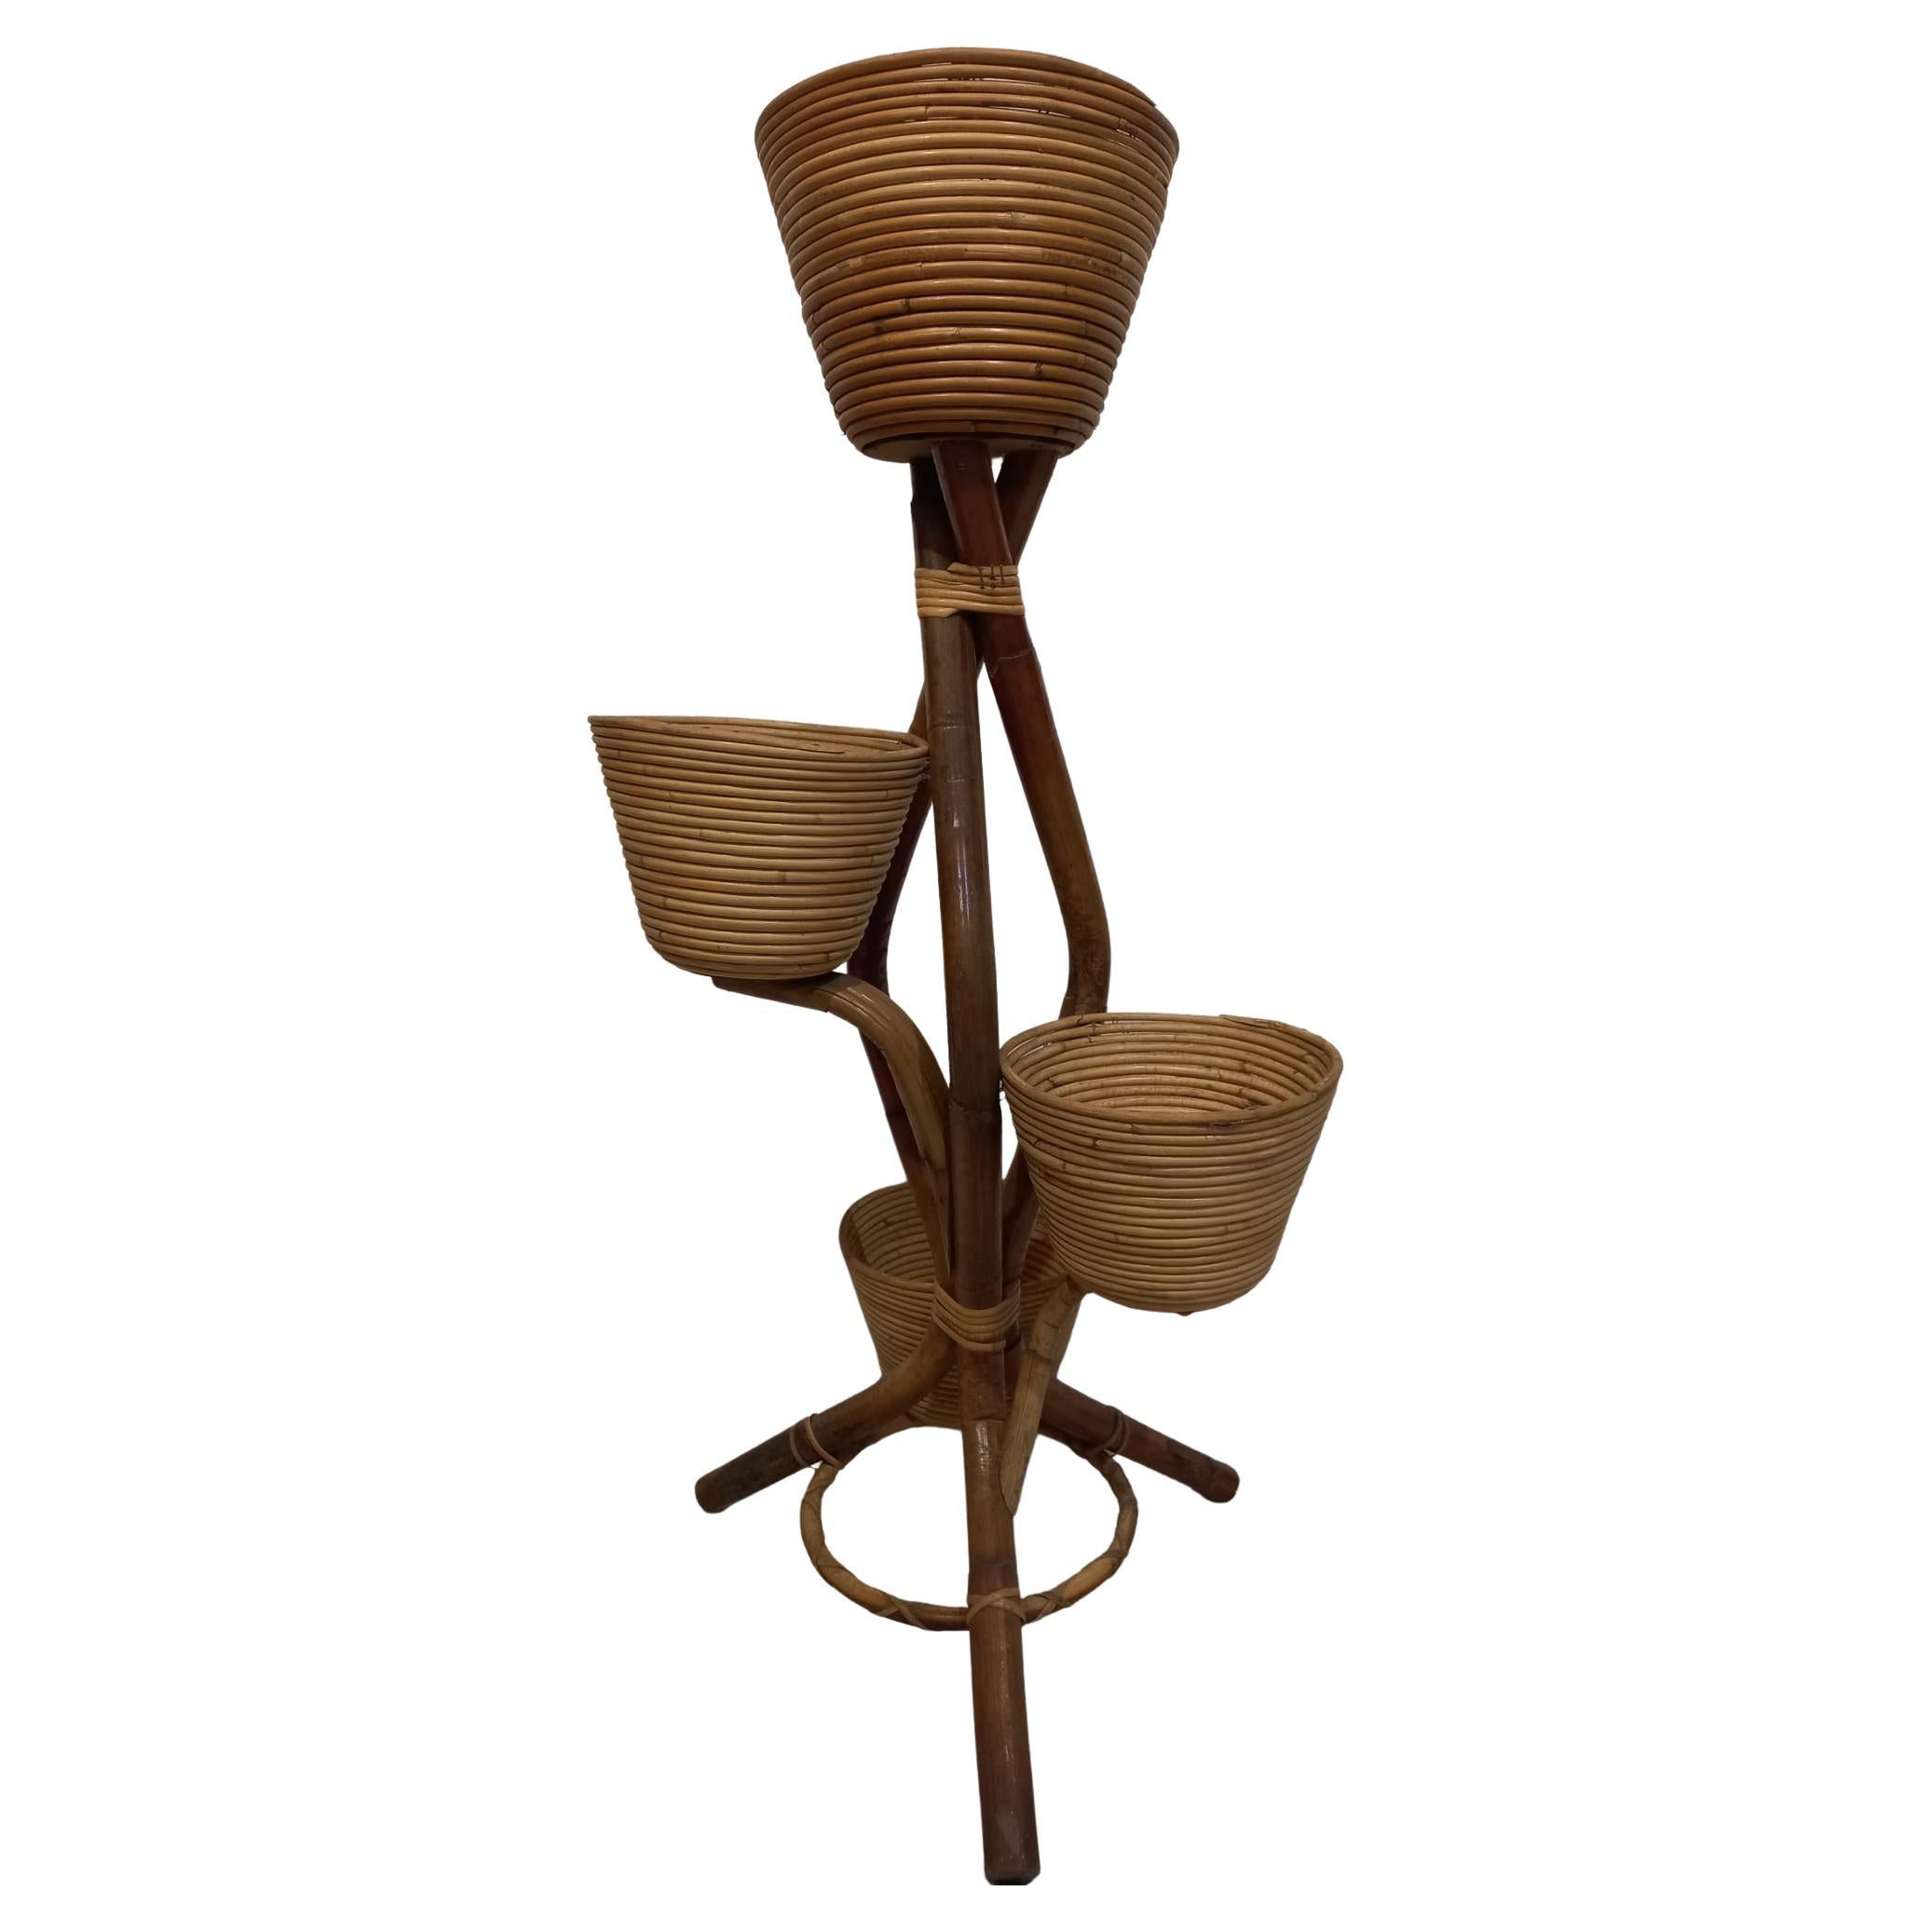 1960s vintage bamboo and rattan flower stand from Italy For Sale